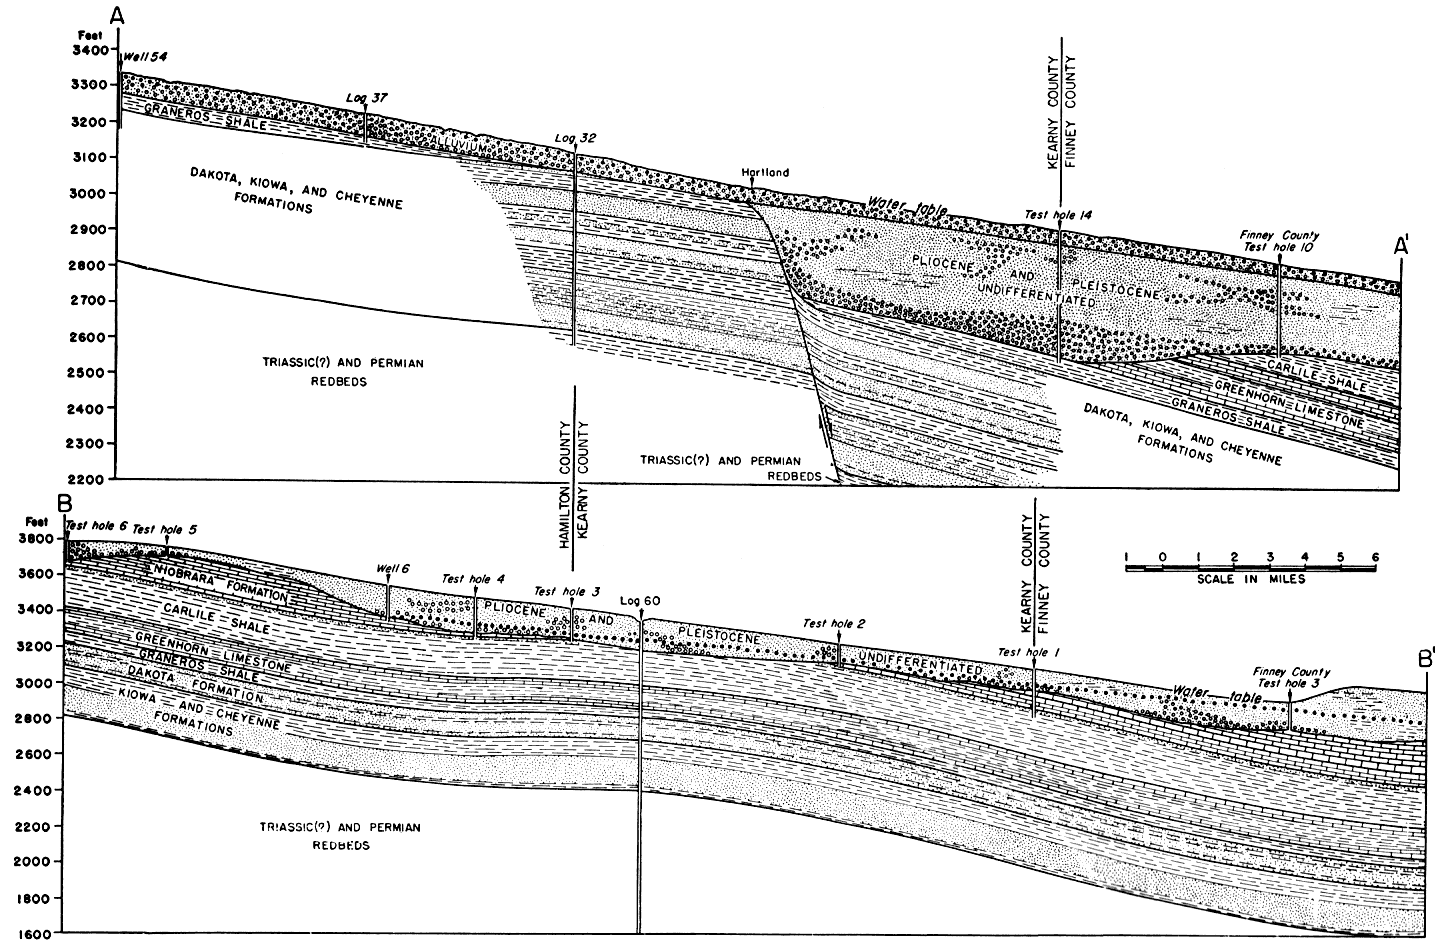 Upper cross section has alluvium over Dakota over redbeds in west, and Pliocene and Pleistocene under alluvium in east; lower cross section more consistant in layers from west to east.